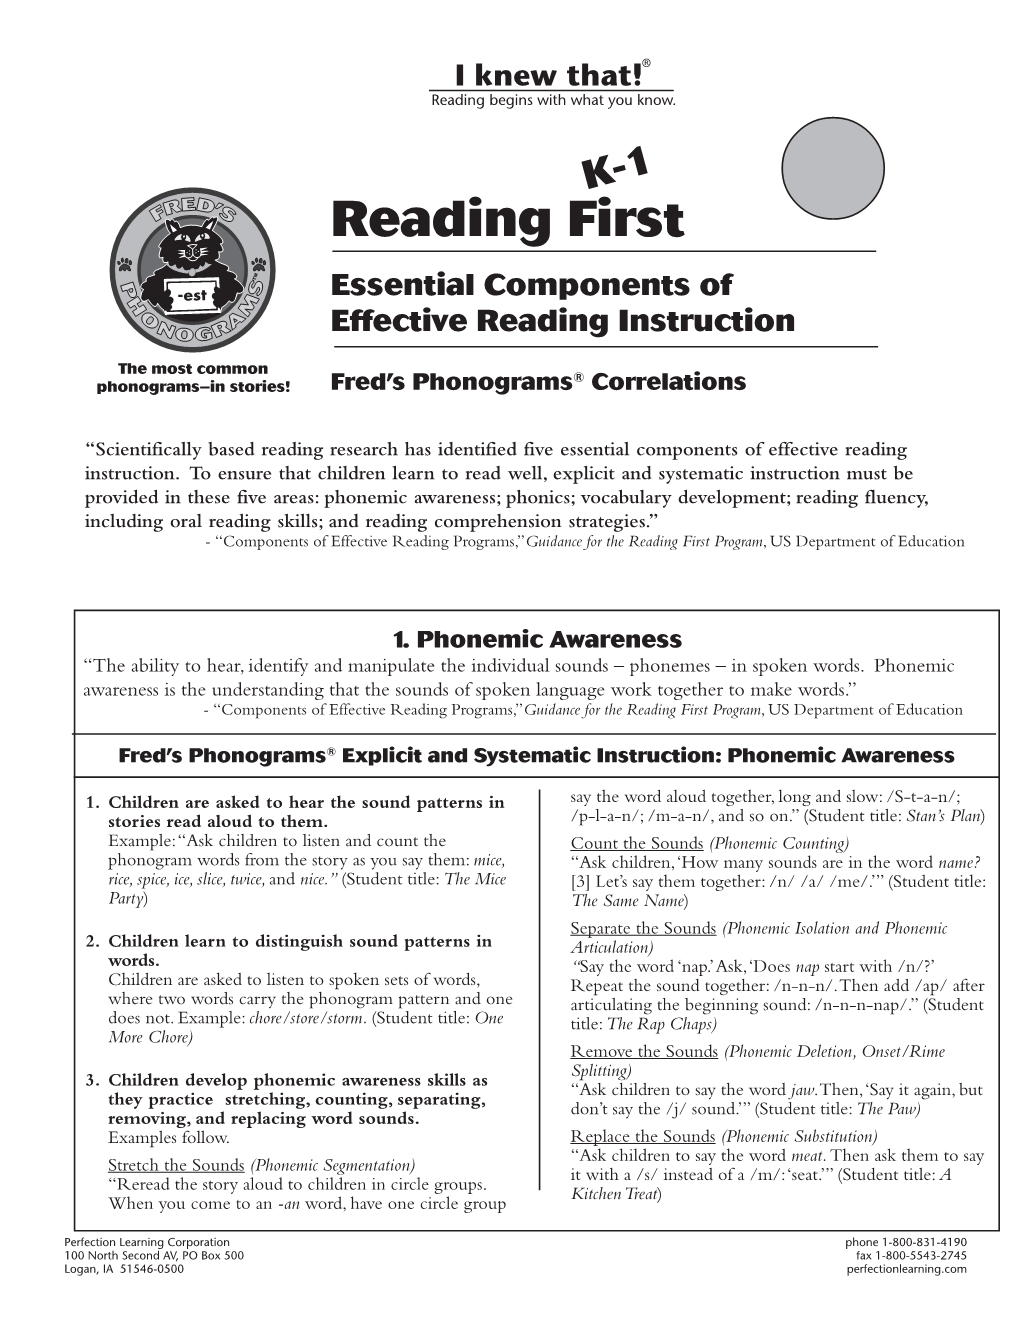 Reading First Program, US Department of Education Fred’S Phonograms® Explicit and Systematic Instruction: Reading Fluency K-1 1